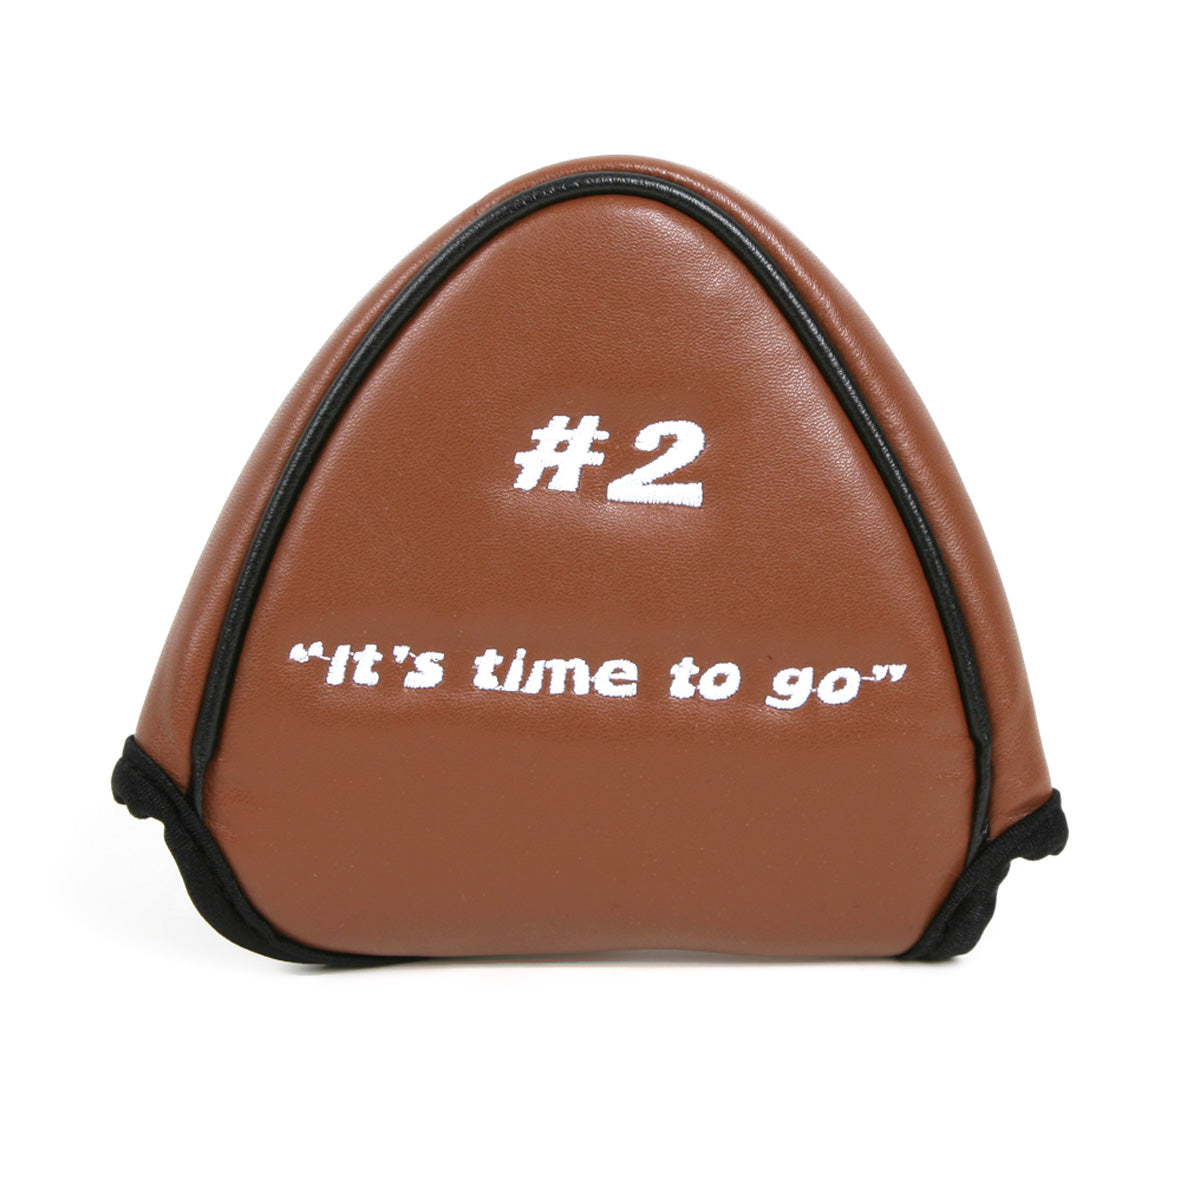 top of Intech Golf #2 Poop Putter cover with #2 and "It's time to go" embroidered